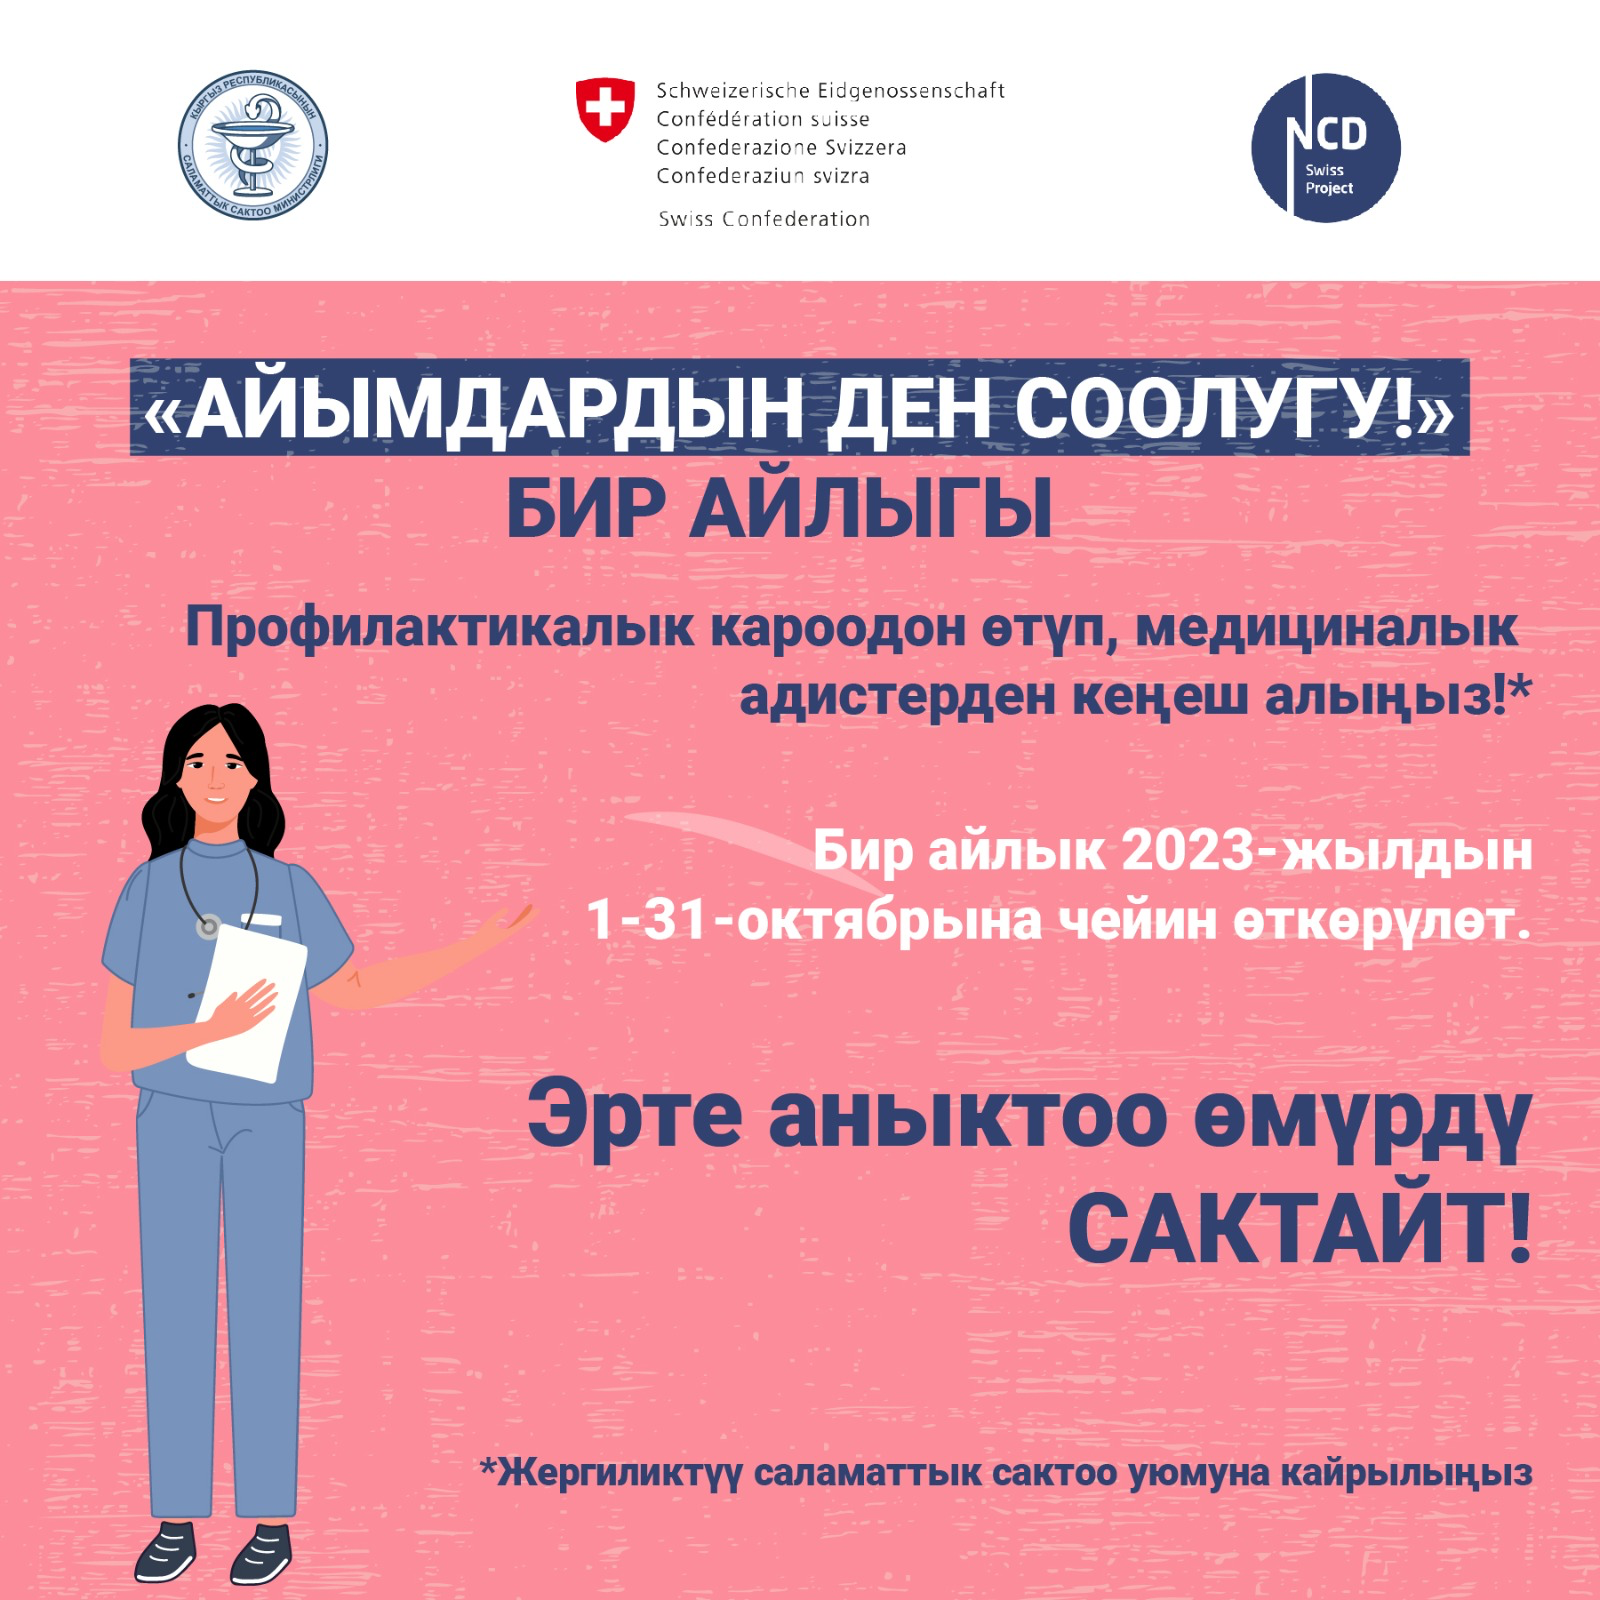 Kyrgyzstan launches annual Women’s Health Month campaign with Swiss support to prioritize women's well-being 